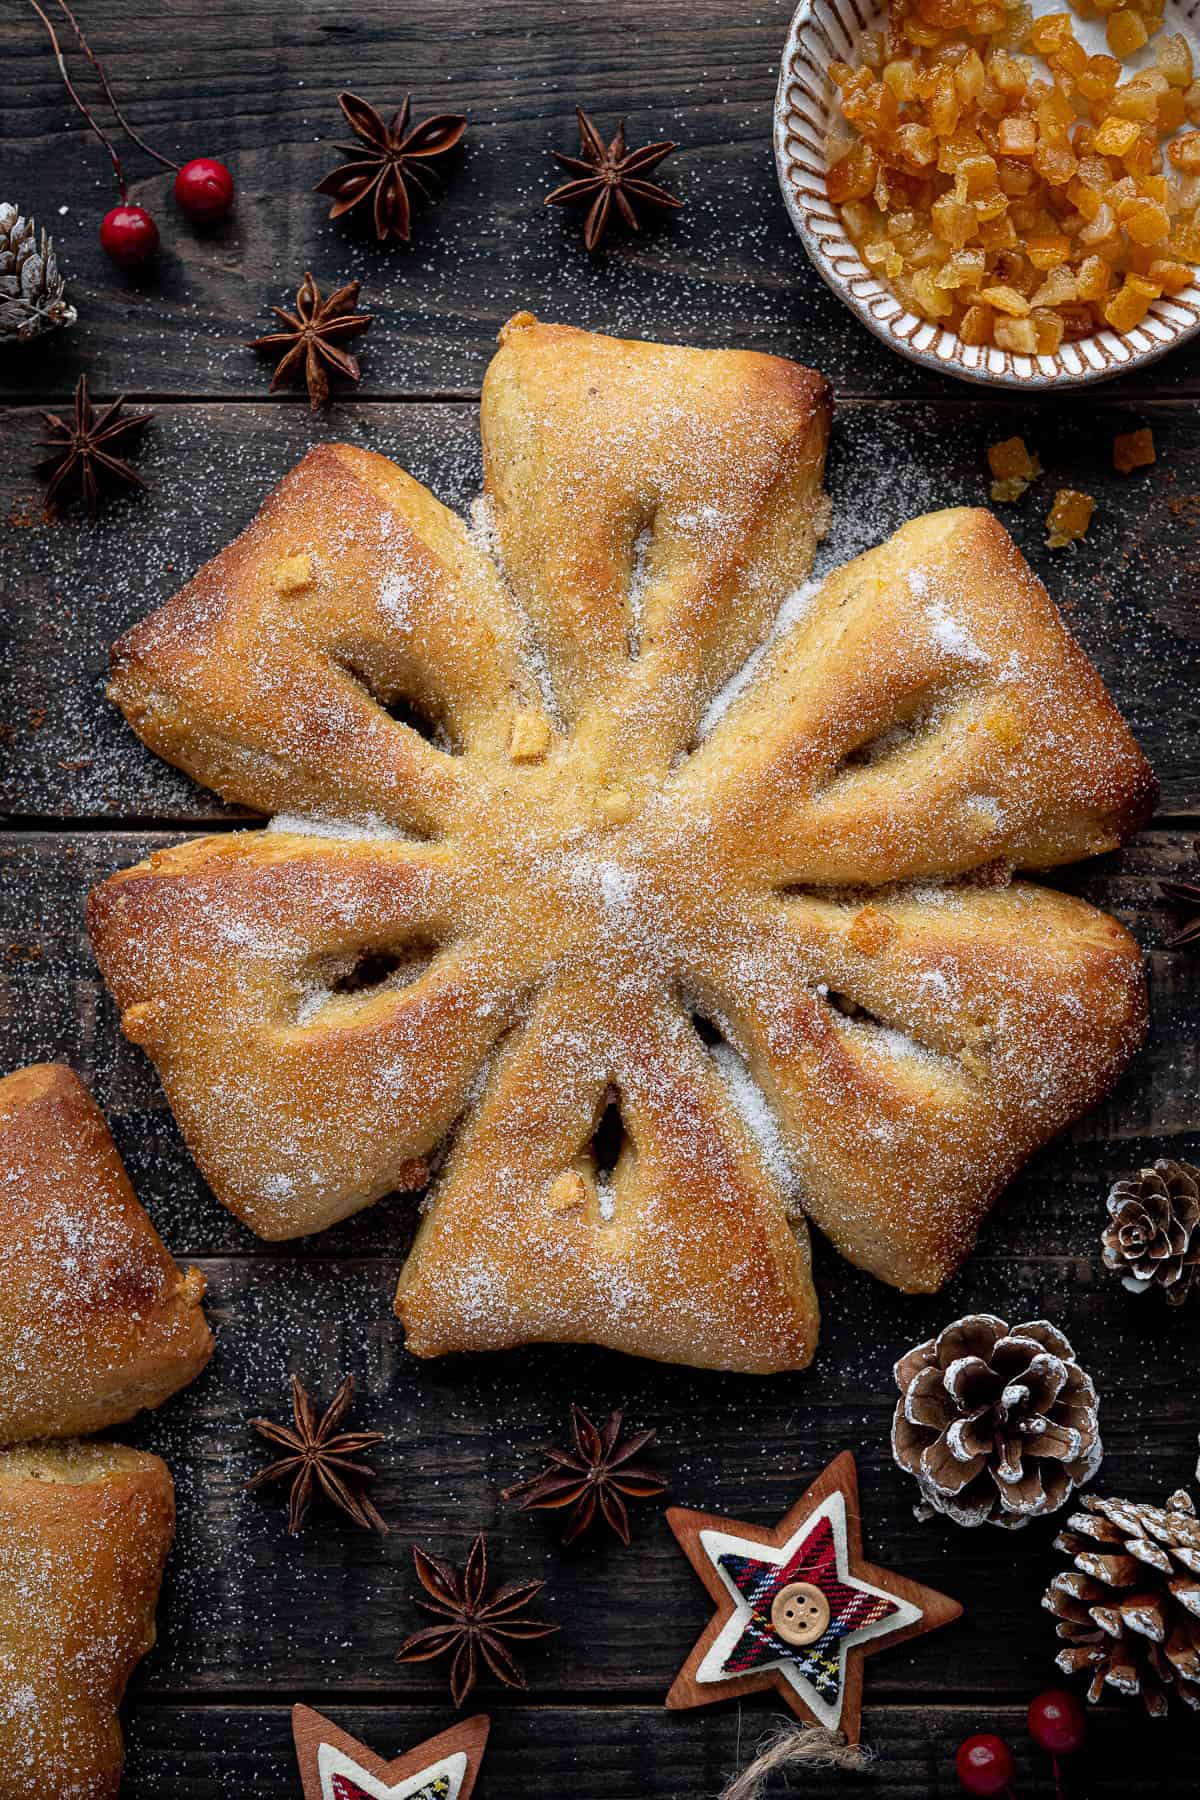 Orange and anise snowflake bread on a wooden background surrounded by Christmas decorations and a bowl of candied peel.